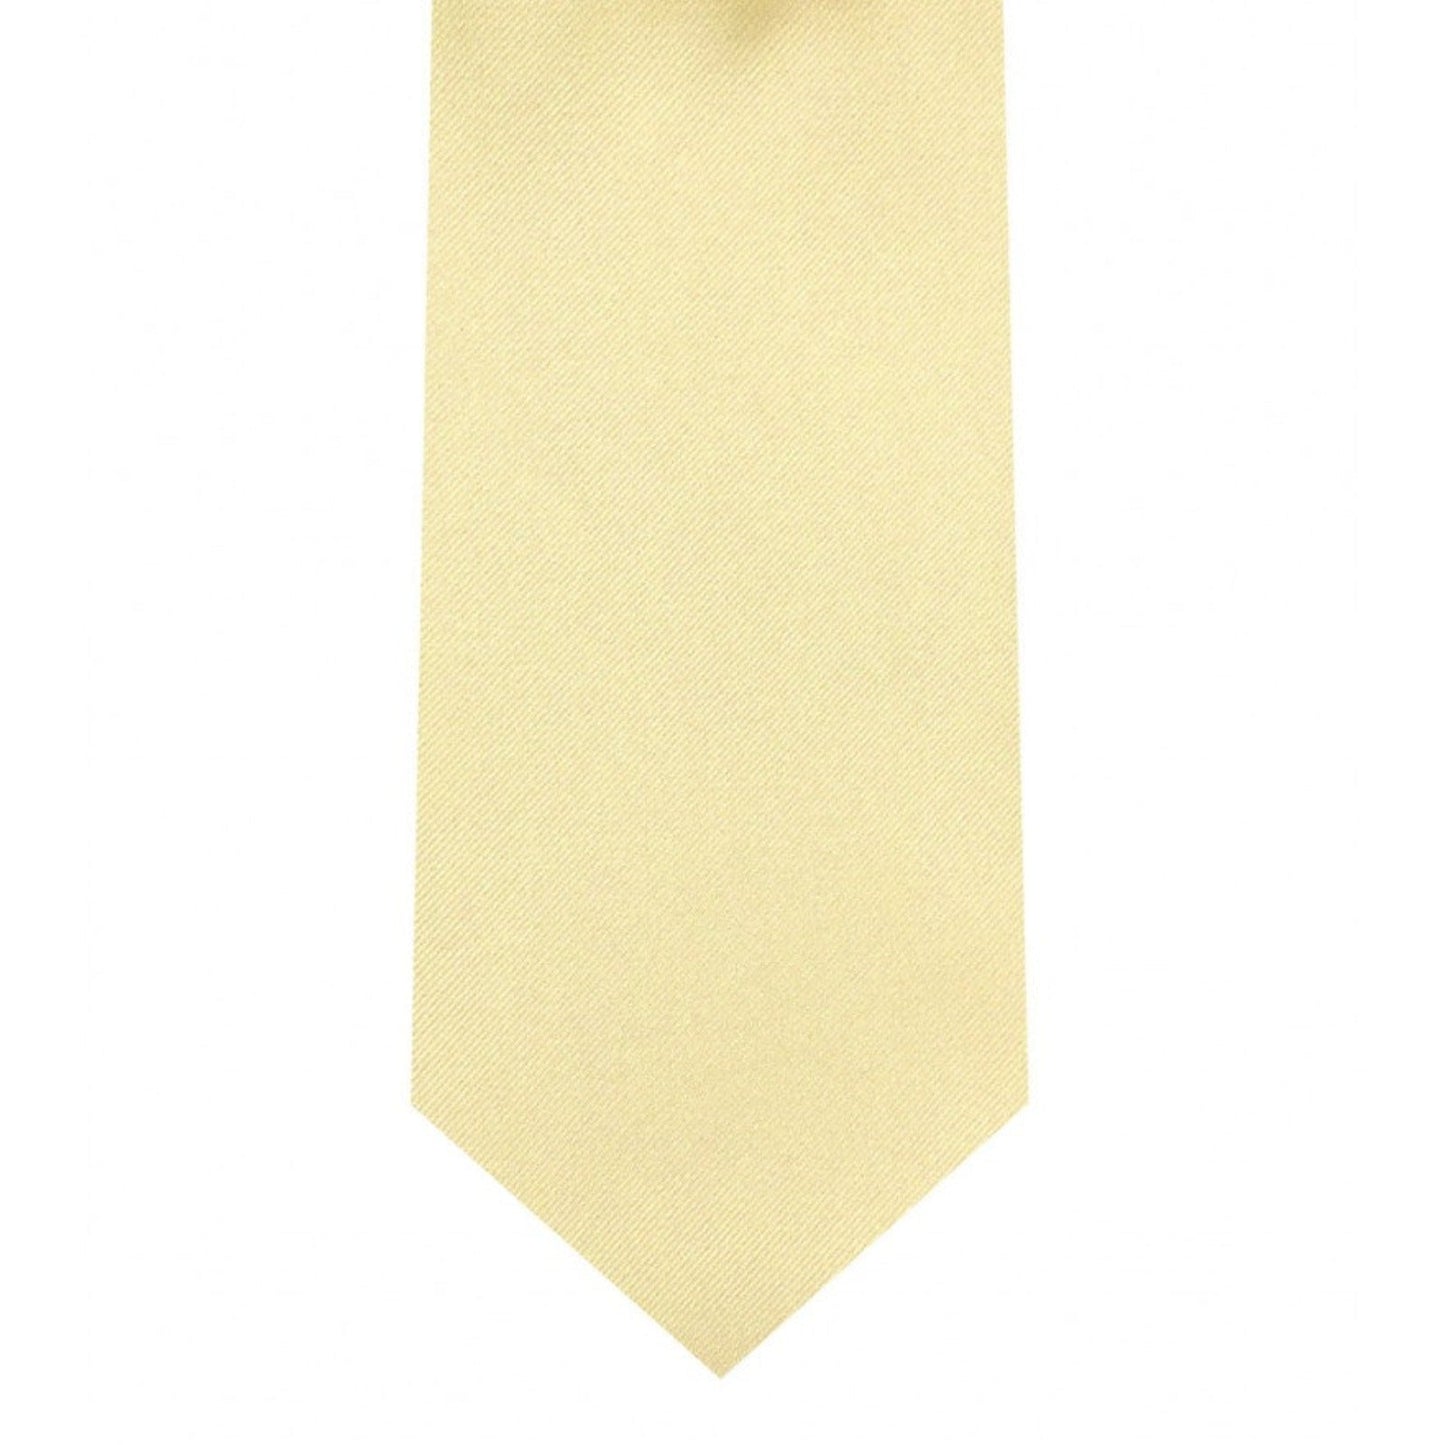 Classic Canary Tie Skinny width 2.75 inches With Matching Pocket Square | KCT Menswear 